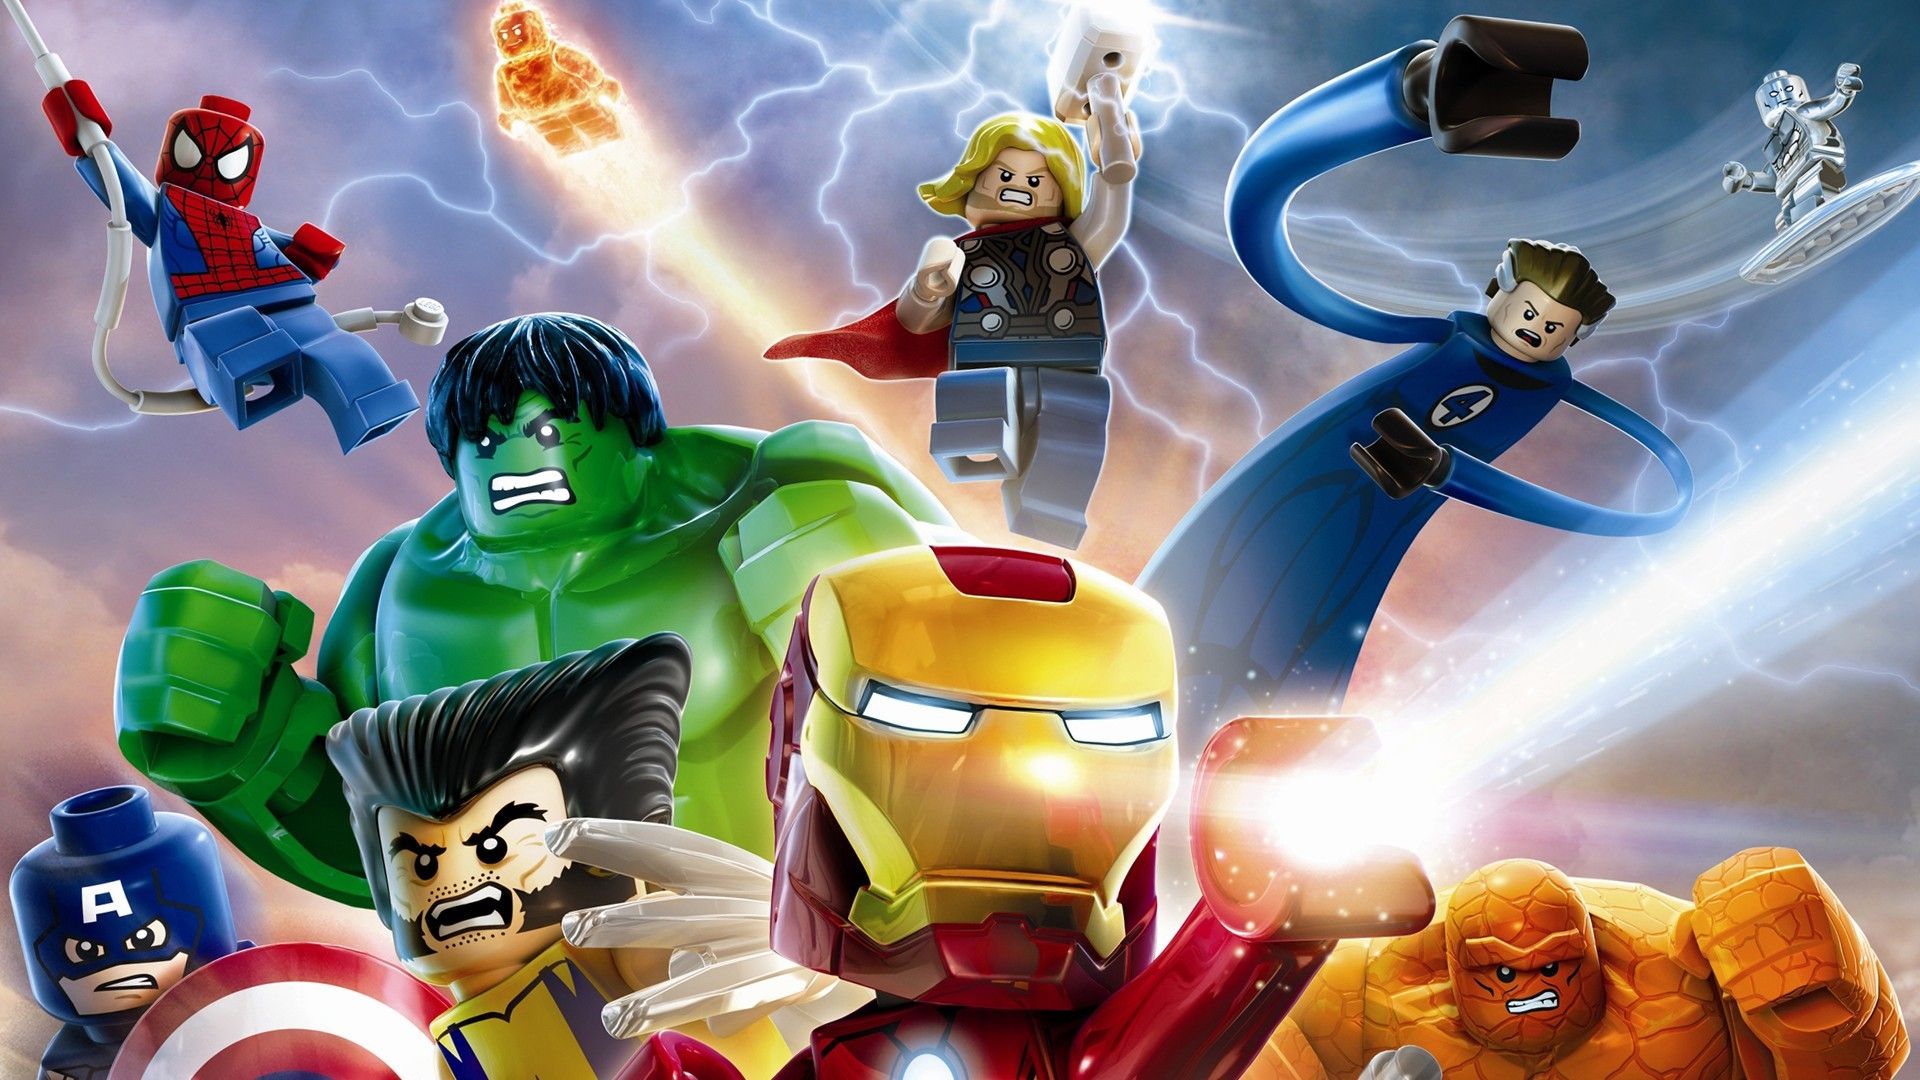 Put Some Lego People on Your Desktop With These Wallpaper. Lego wallpaper, Lego wolverine, Avengers wallpaper